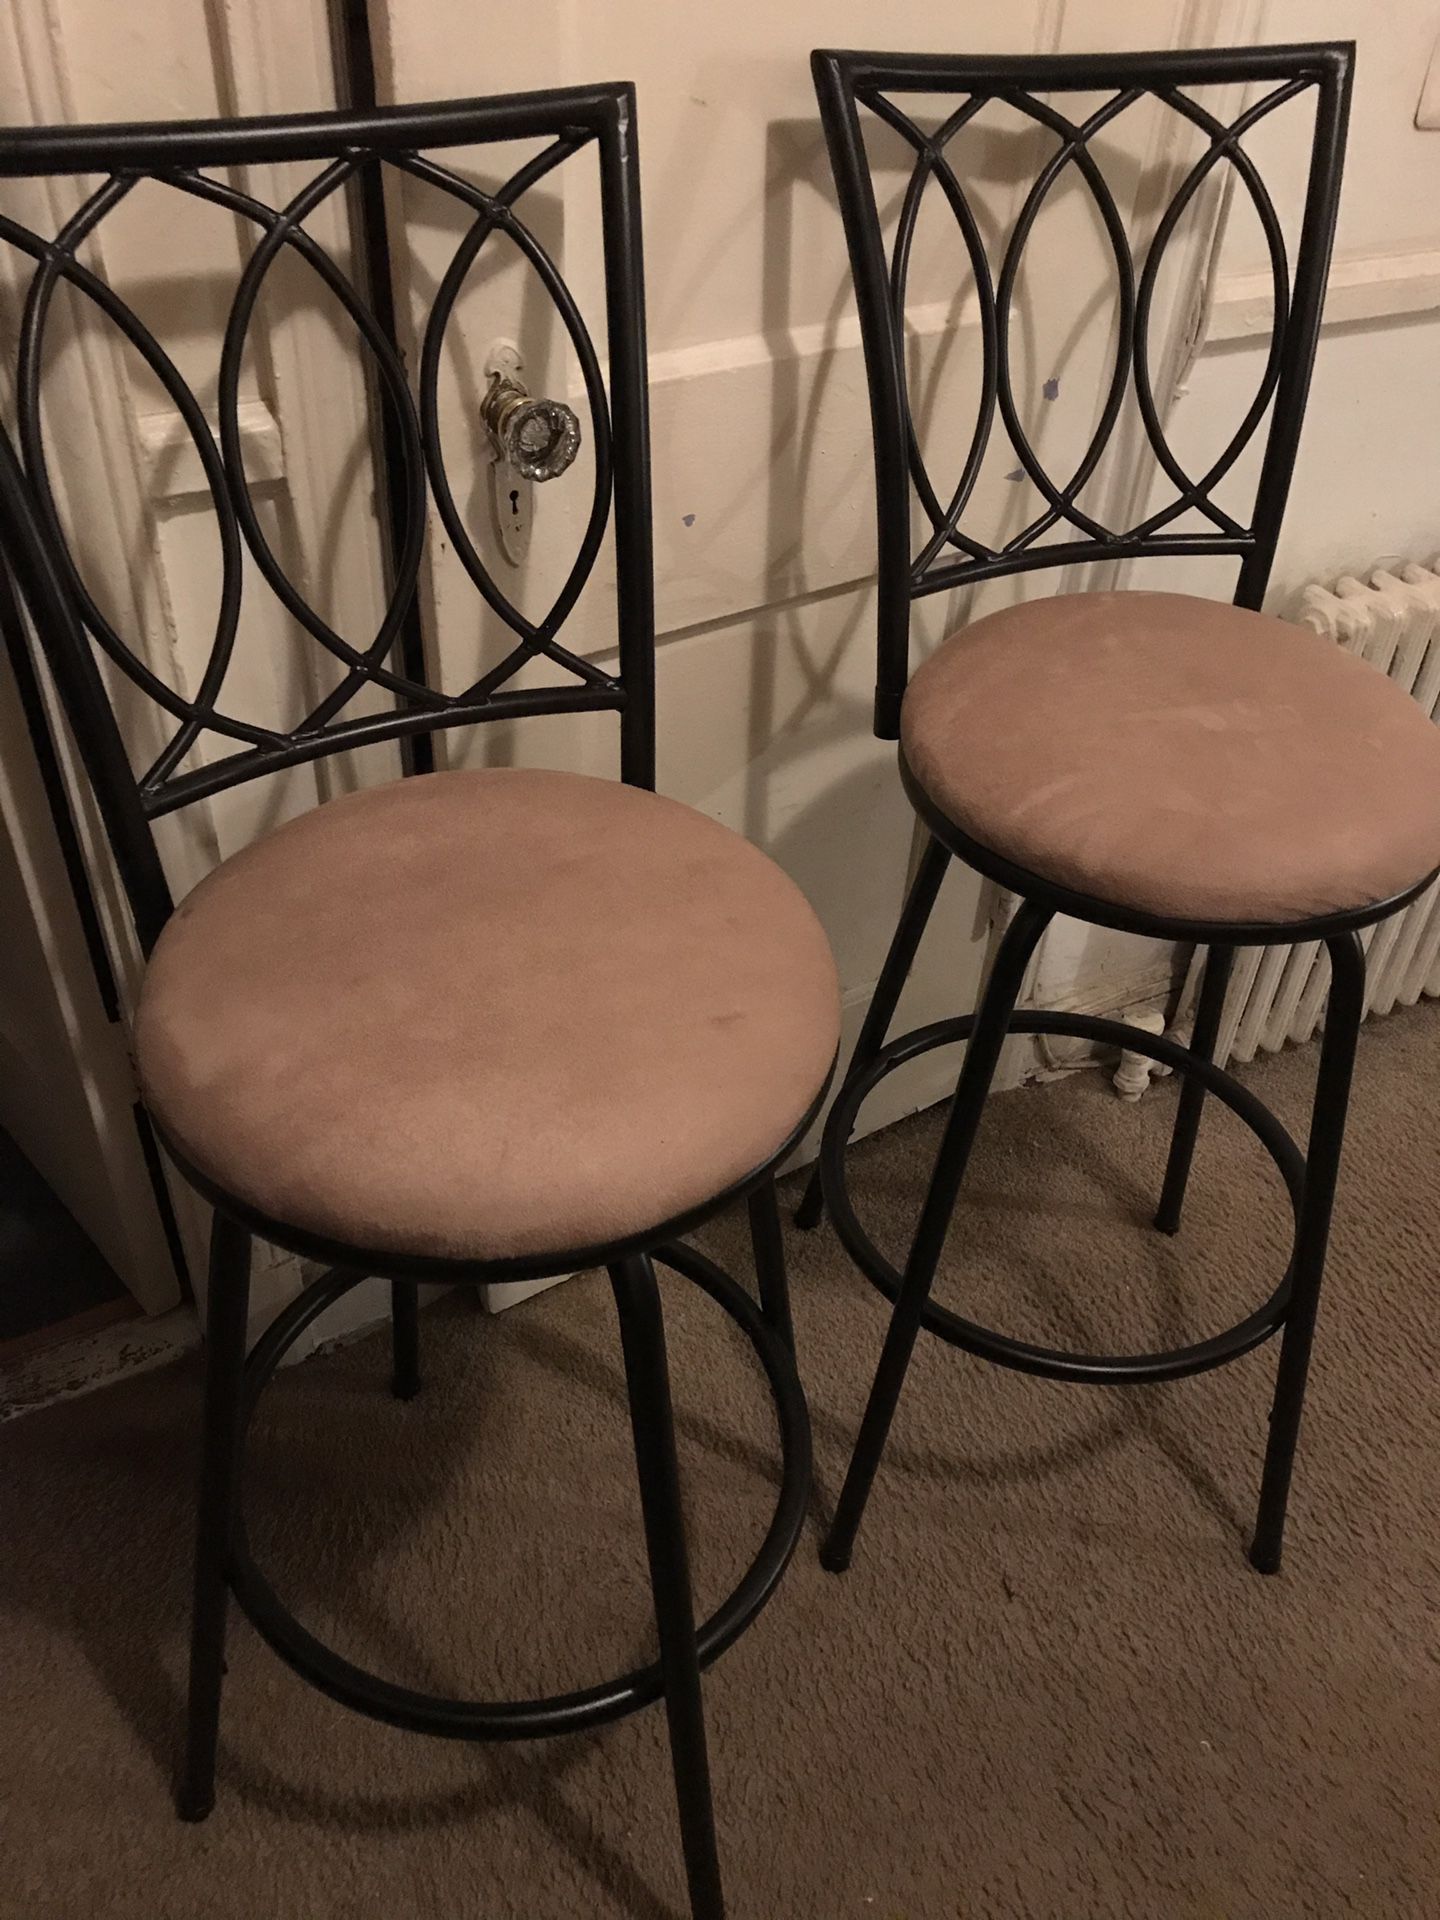 Set of two barstools black metal with tan seats, Very very clean 43 inches tall and 29 inches from floor to seat also the seats turn left to right